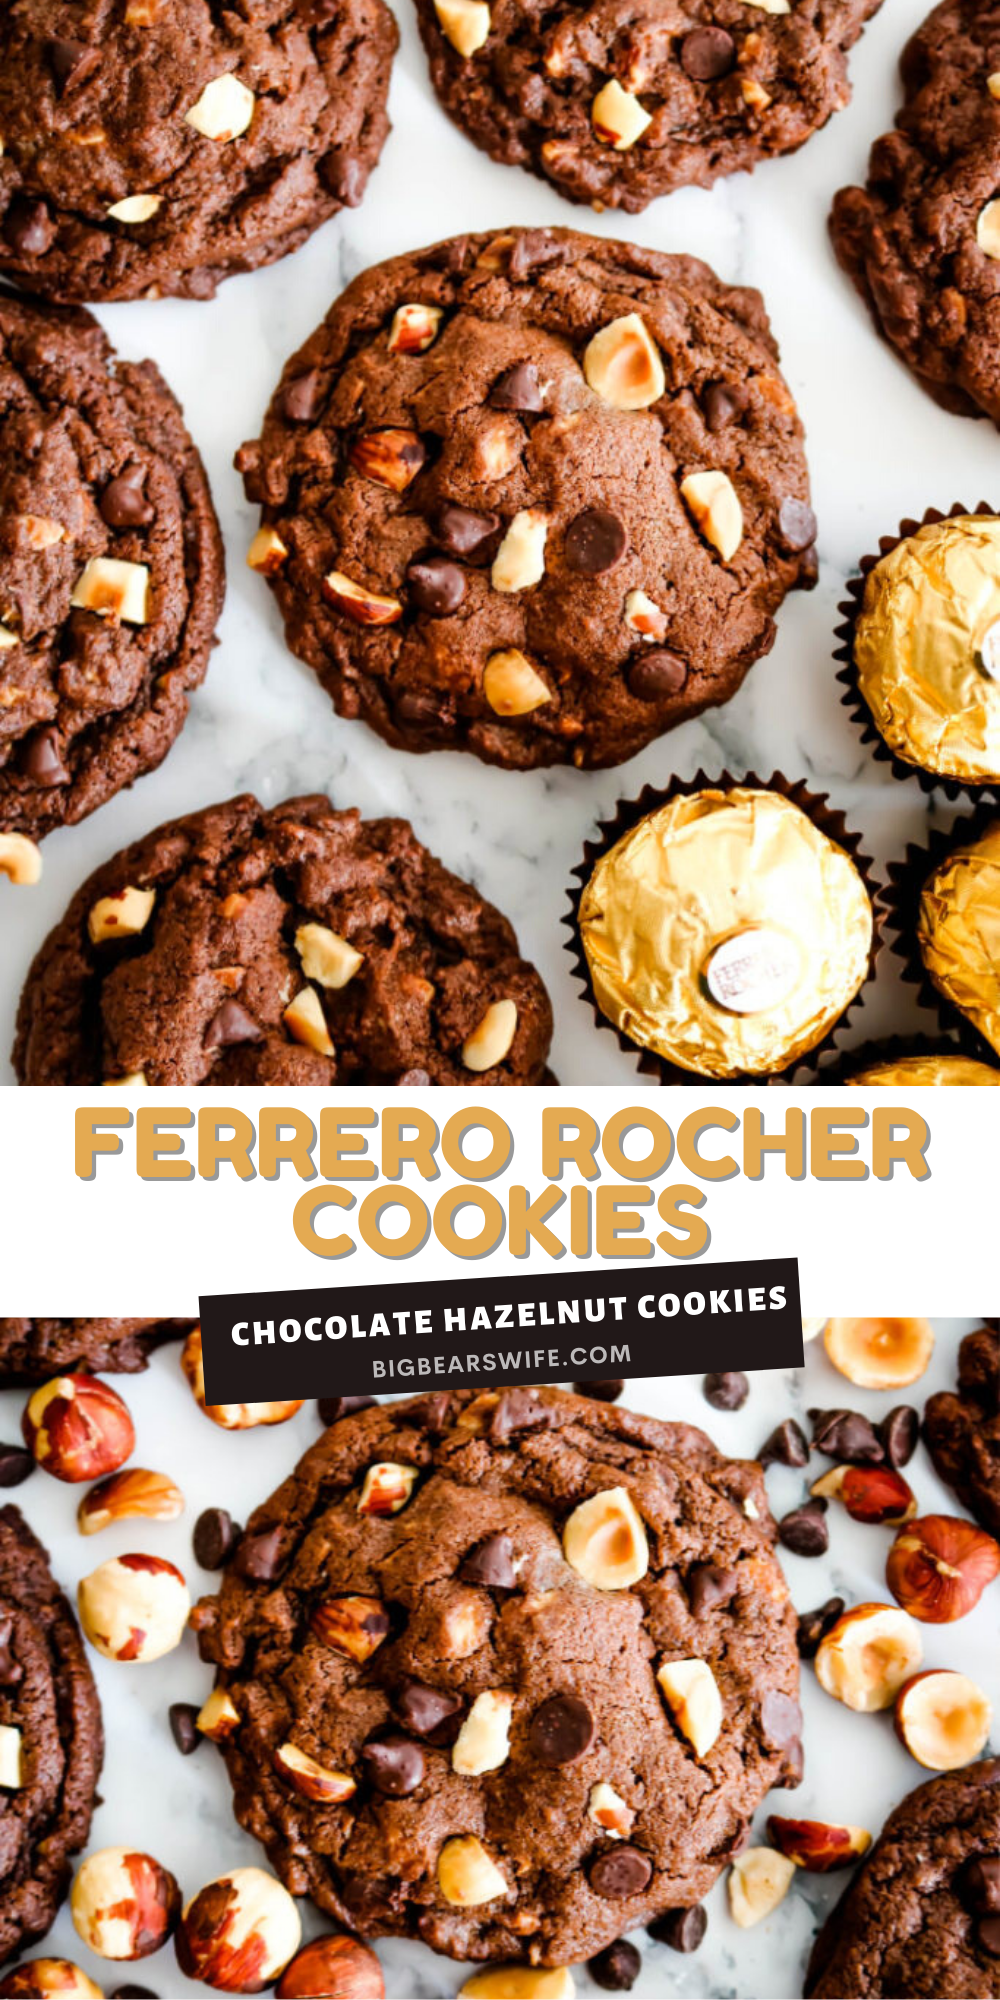 Ferrero Rocher Cookies - These delicious Ferrero Rocher Cookies take the amazing flavors of Ferrero Rocher Chocolates® and bake them into a bakery style treat. These homemade chocolate cookies are not only soft, but also packed with toasted hazelnuts and mini chocolate chips.  via @bigbearswife